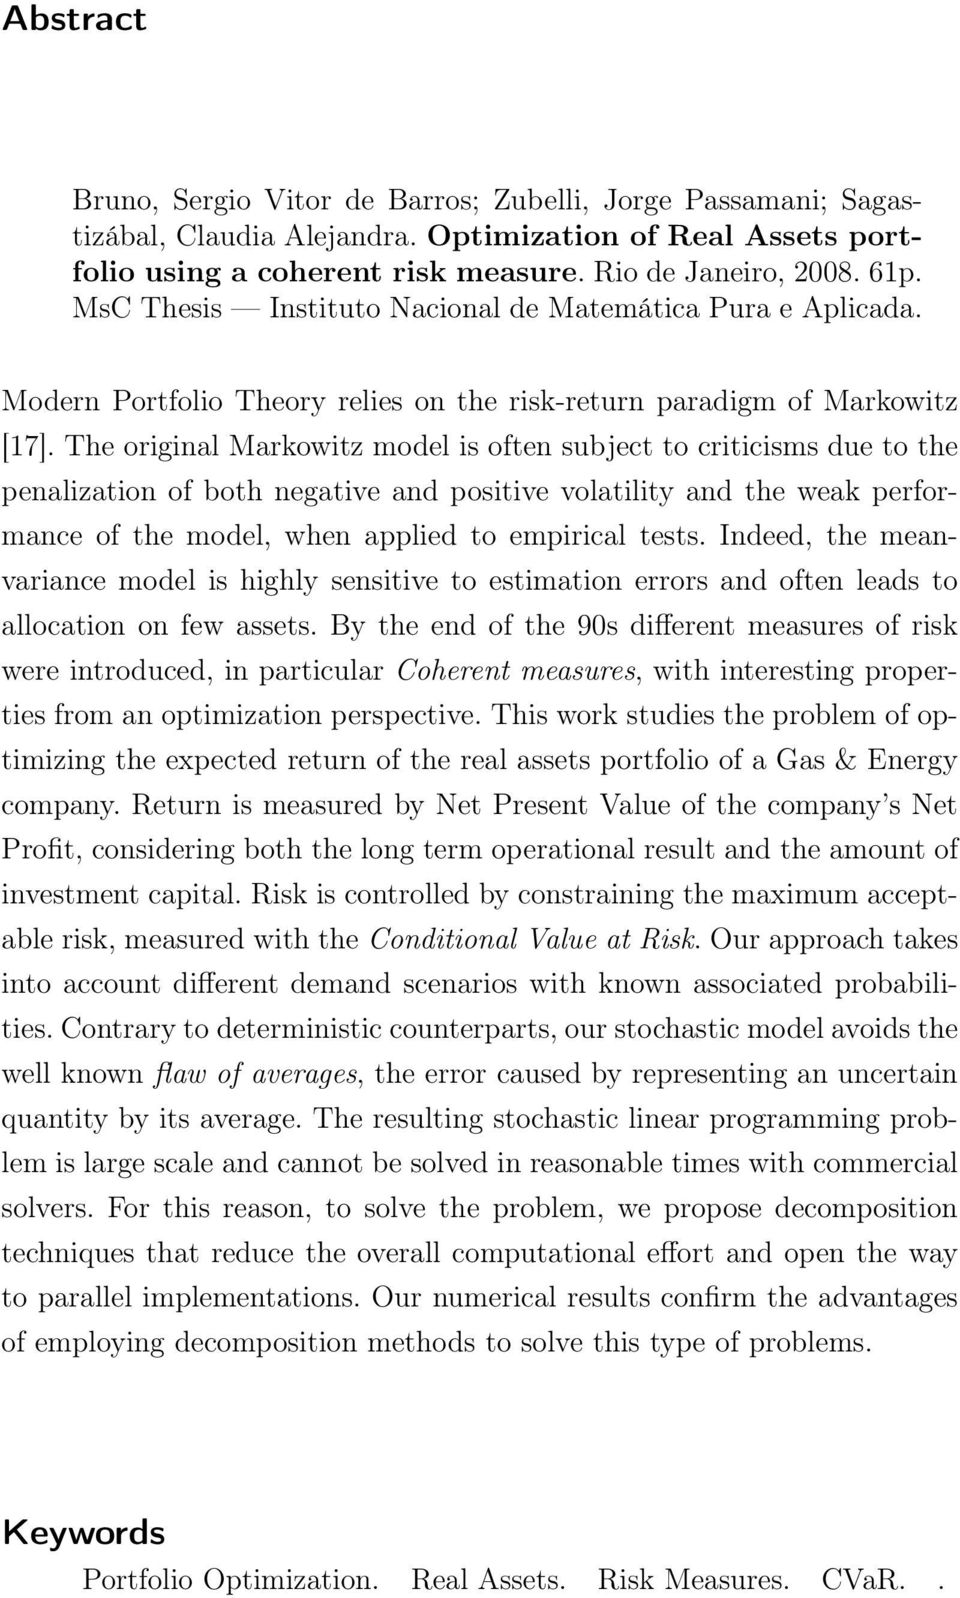 The original Markowitz model is often subject to criticisms due to the penalization of both negative and positive volatility and the weak performance of the model, when applied to empirical tests.